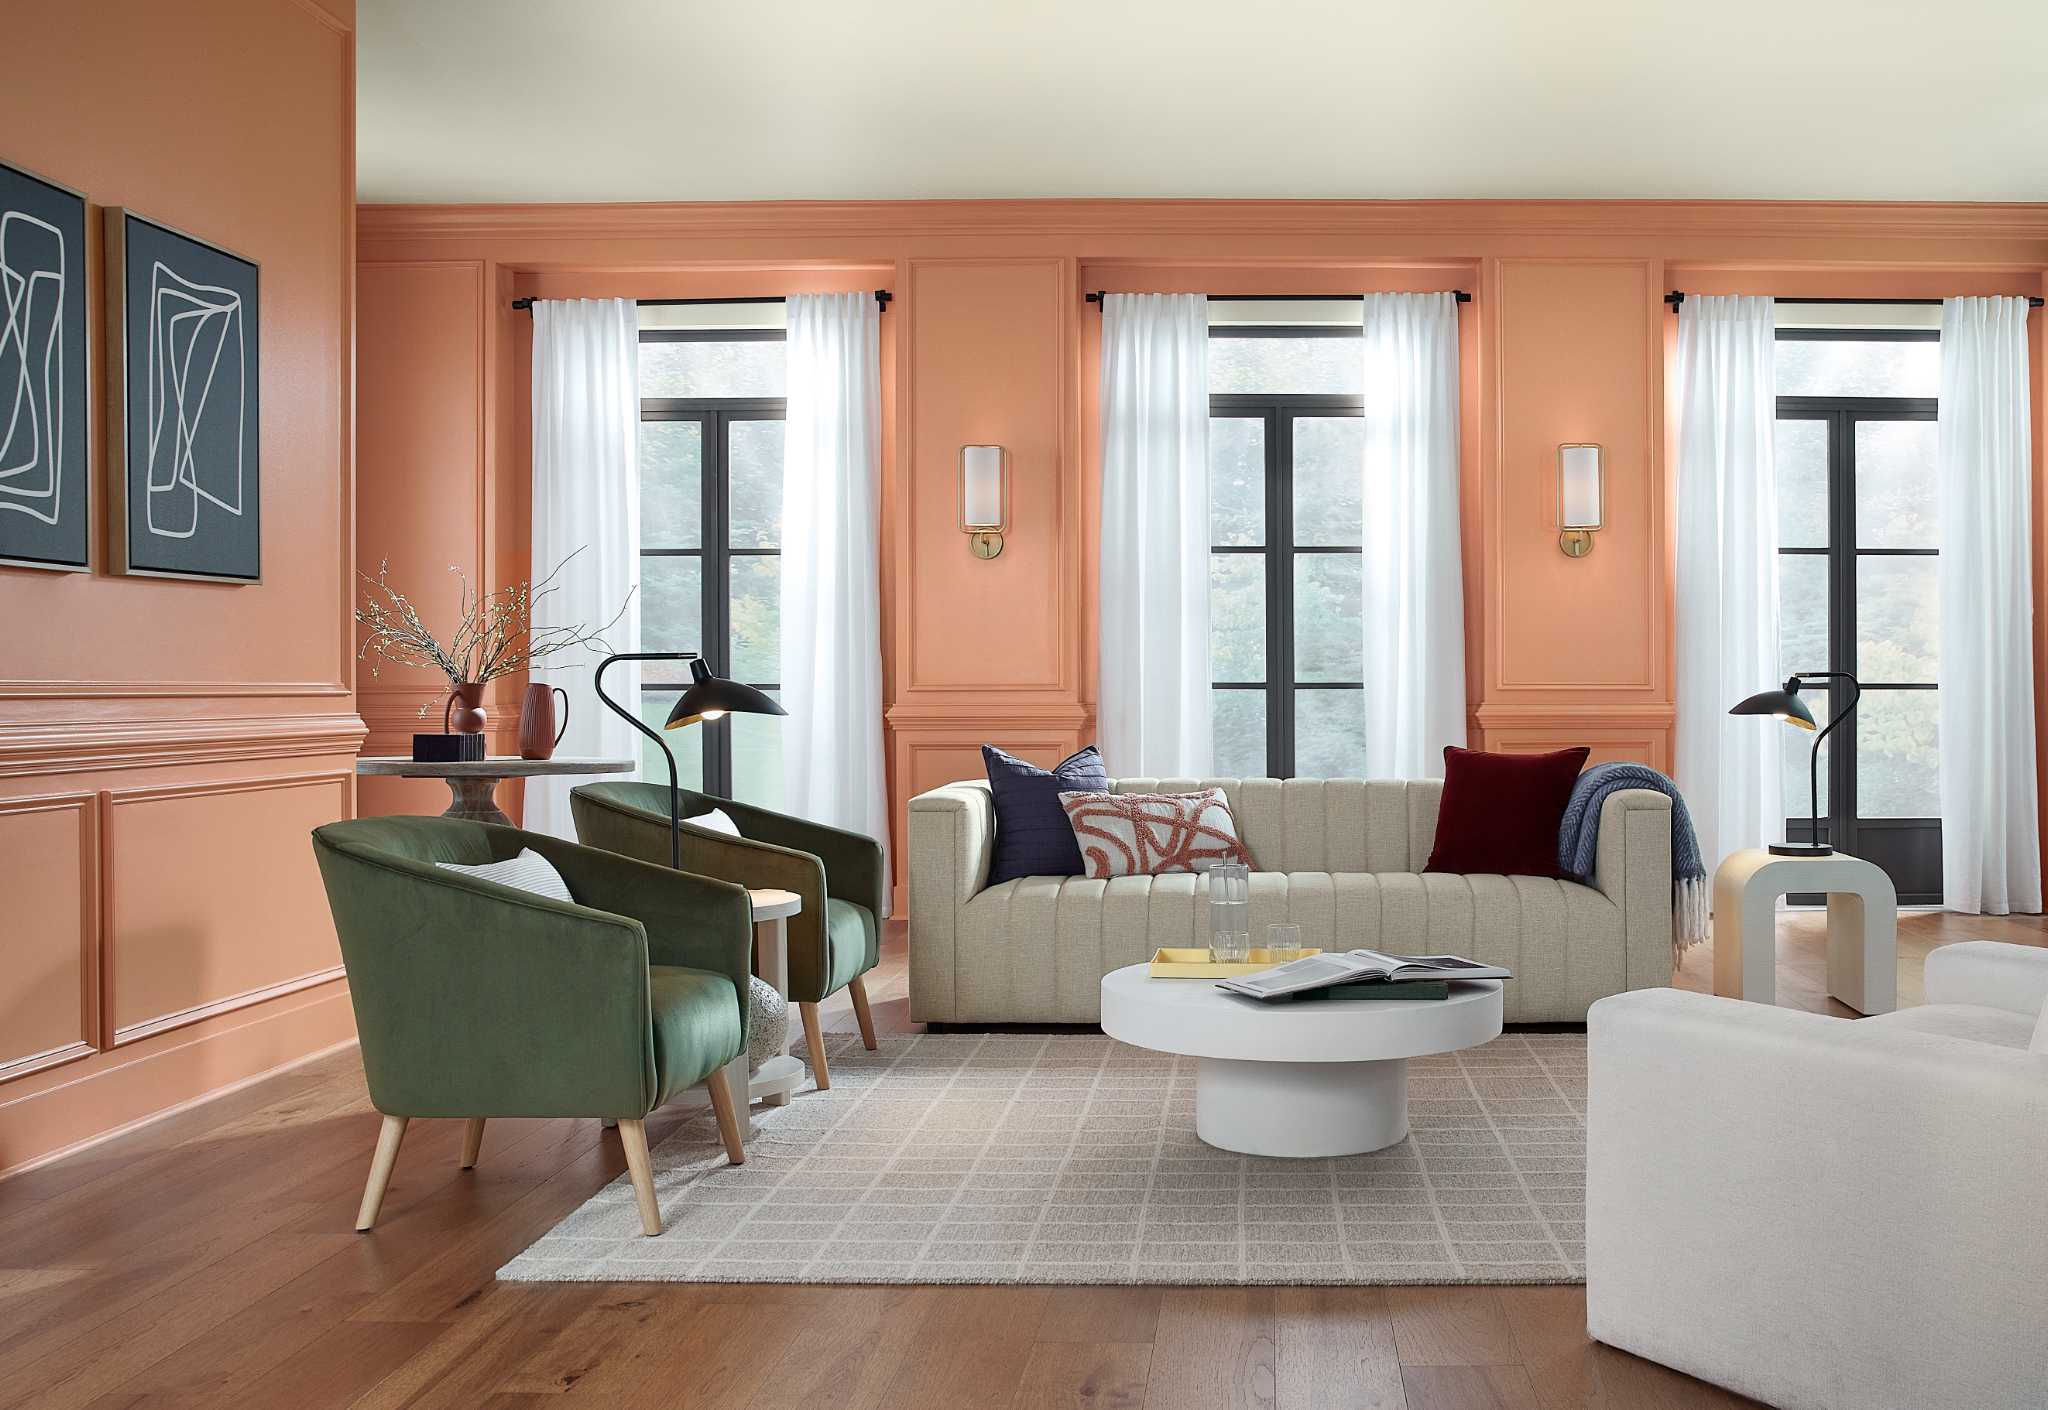 What is Persimmon, HGTV's 'energetic' color of the year?